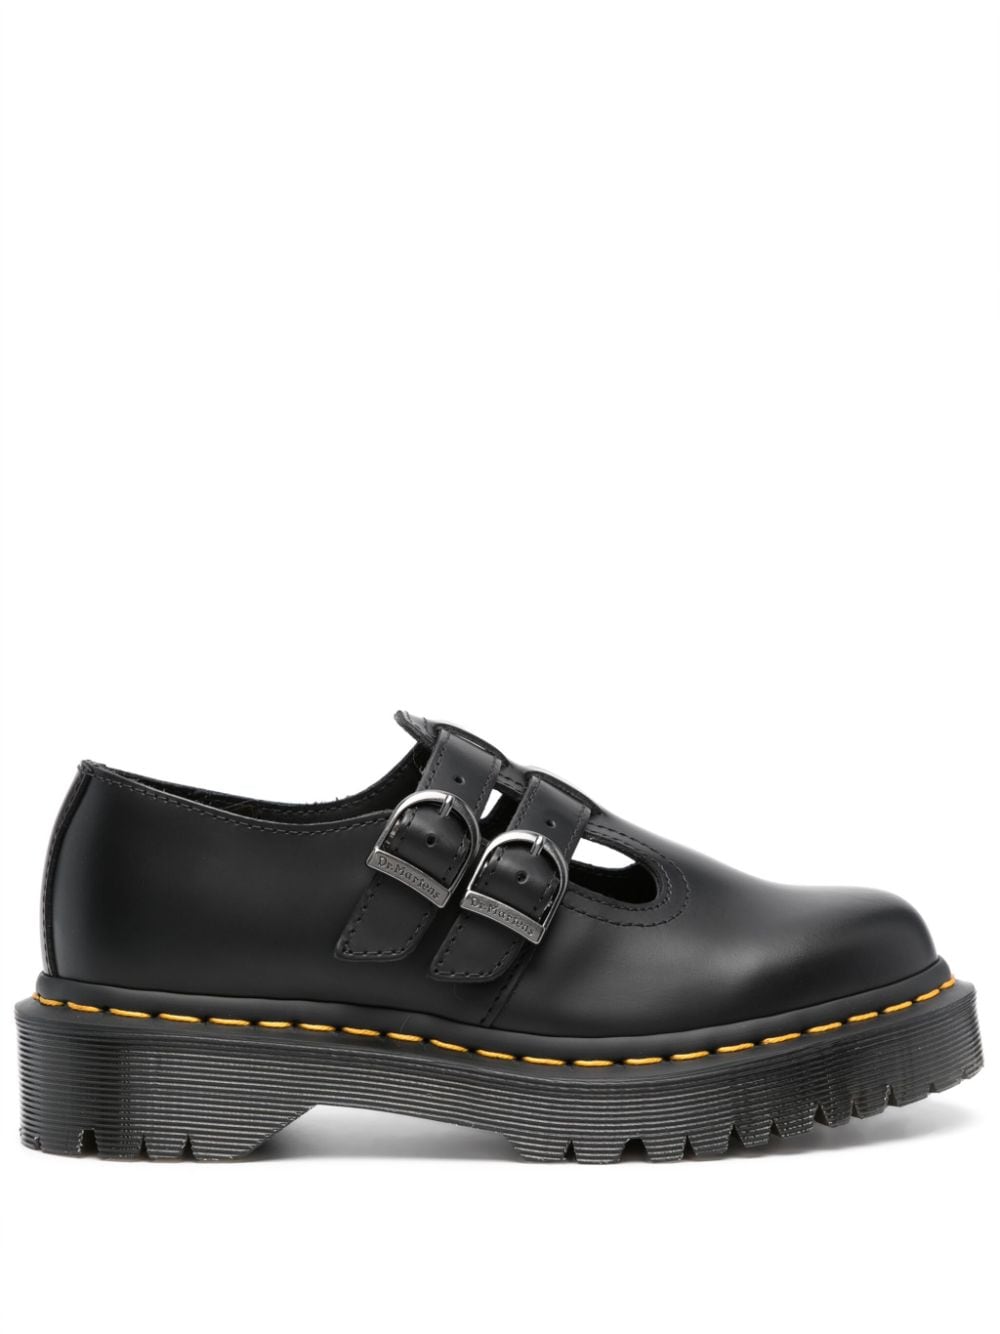 DR. MARTENS' 8065 II BEX MARY-JANE SHOES